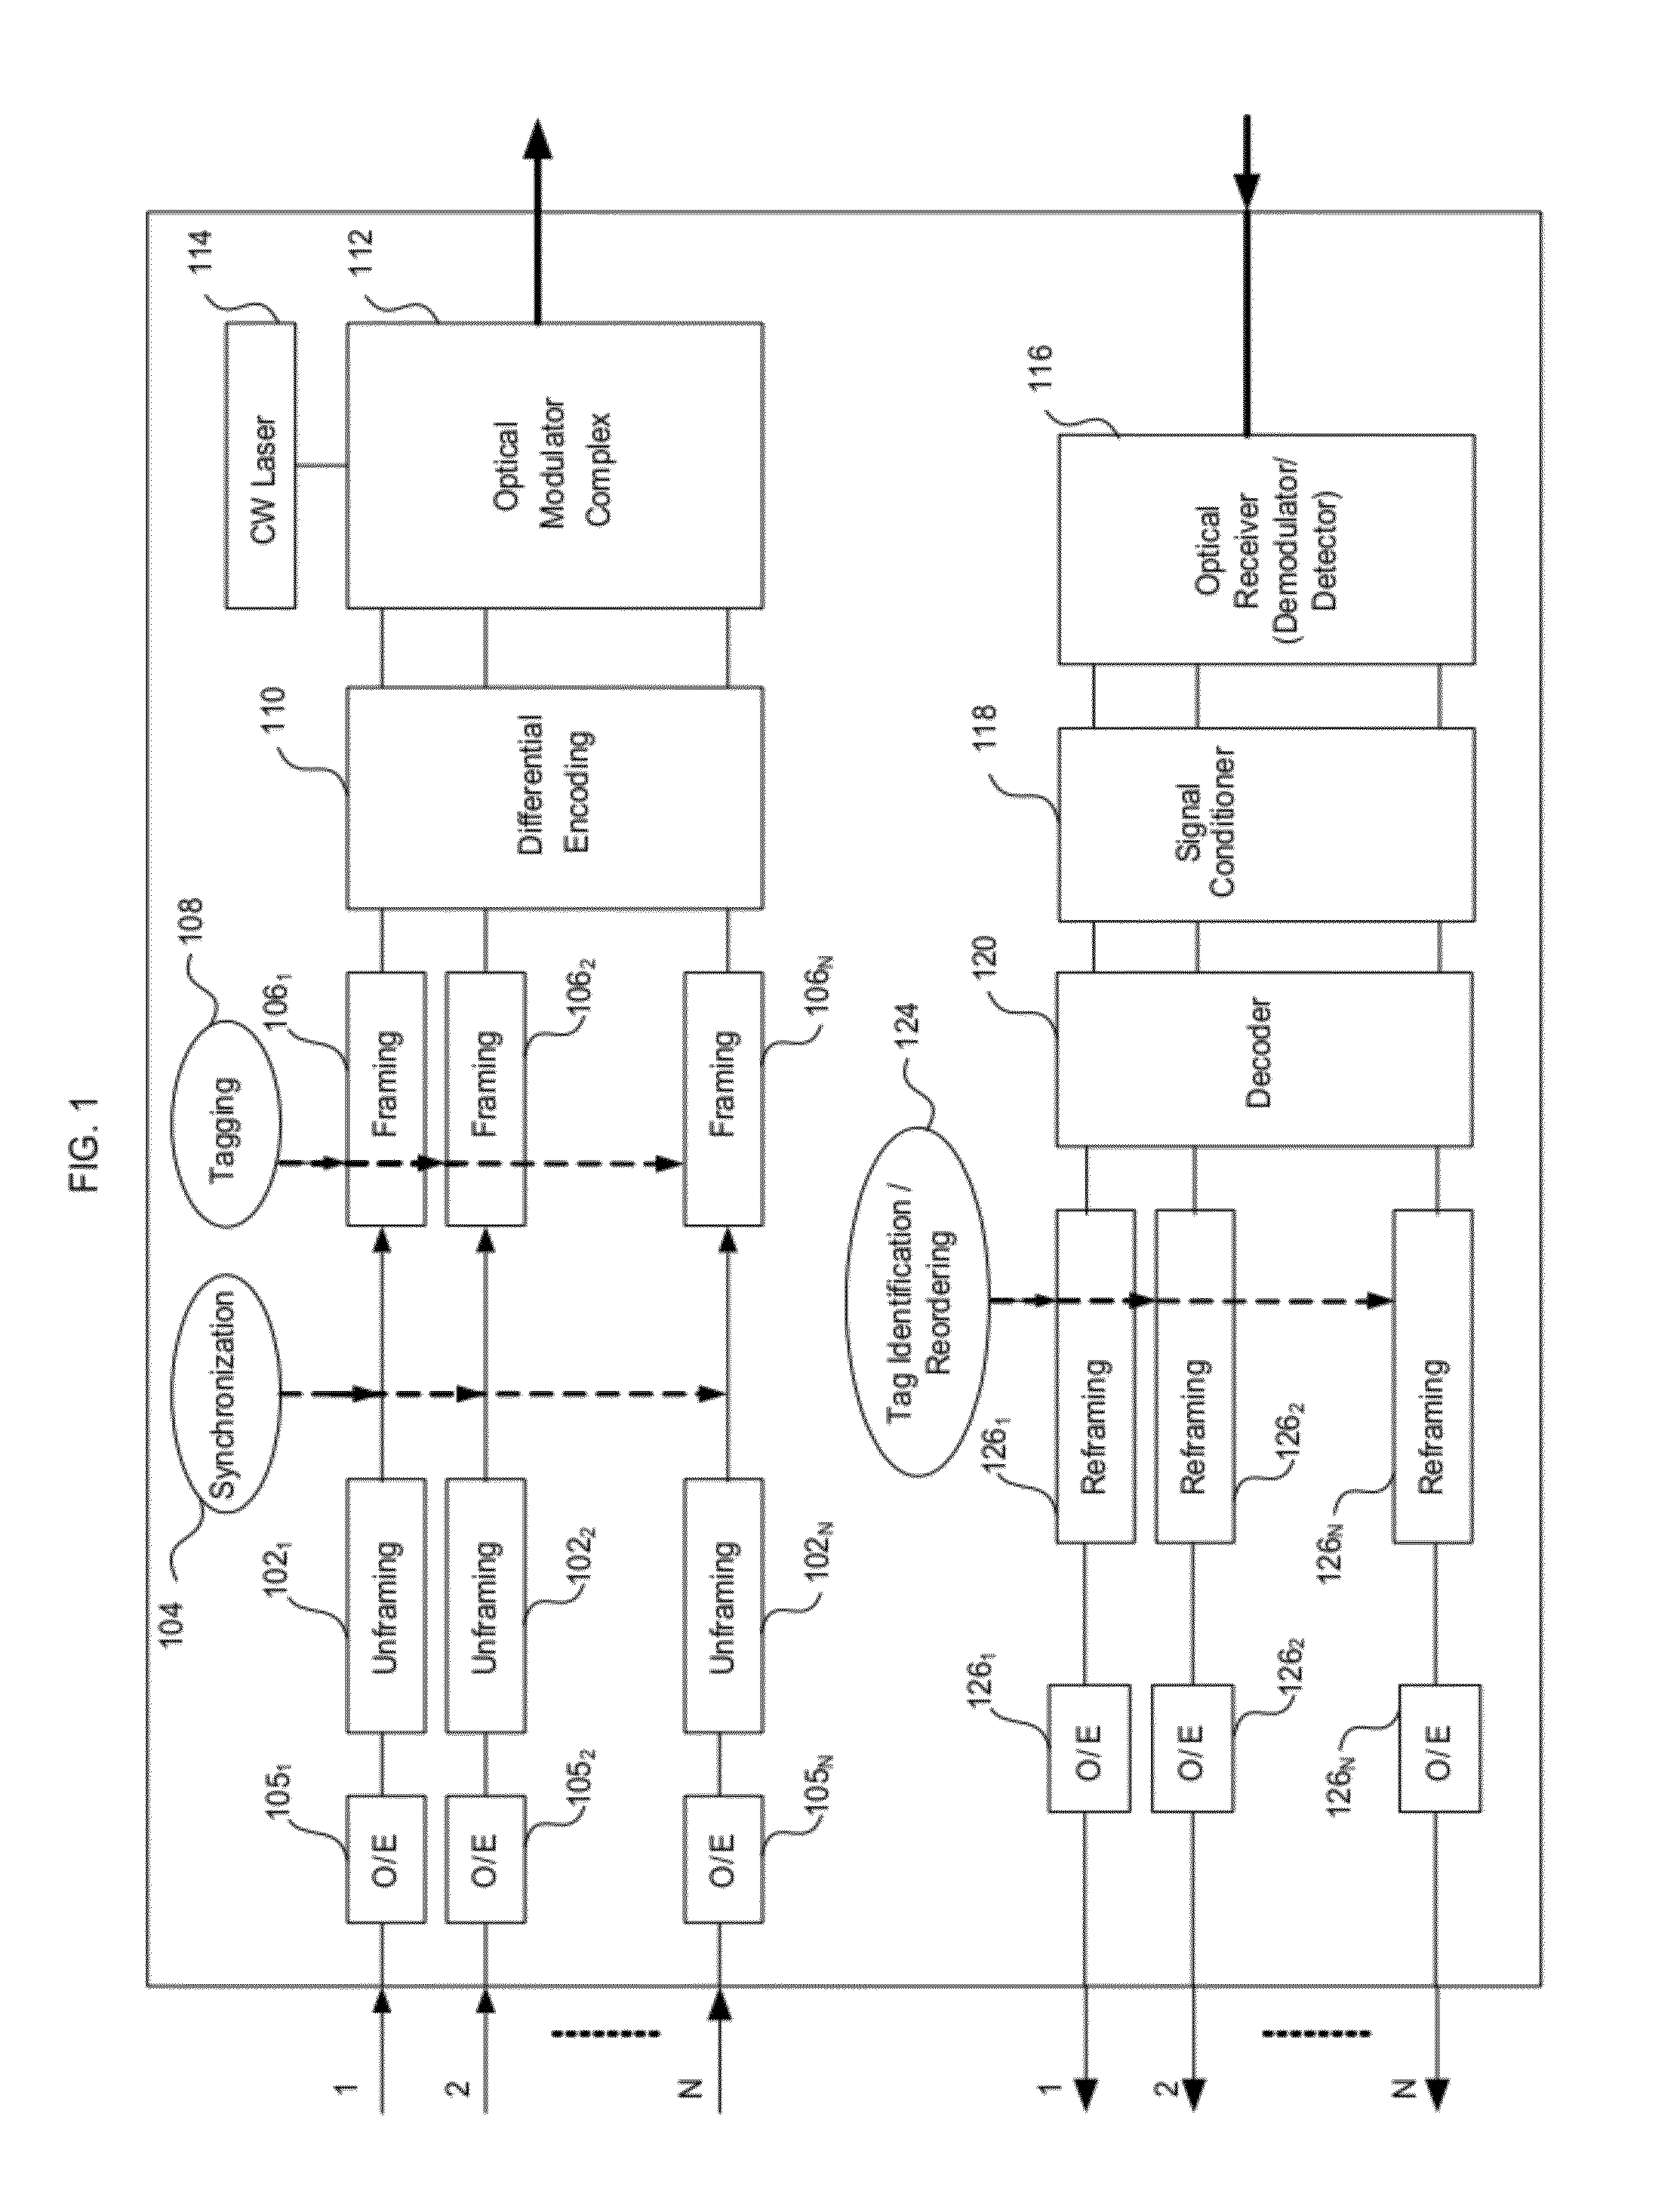 Transport of multiple asynchronous data streams using higher order modulation